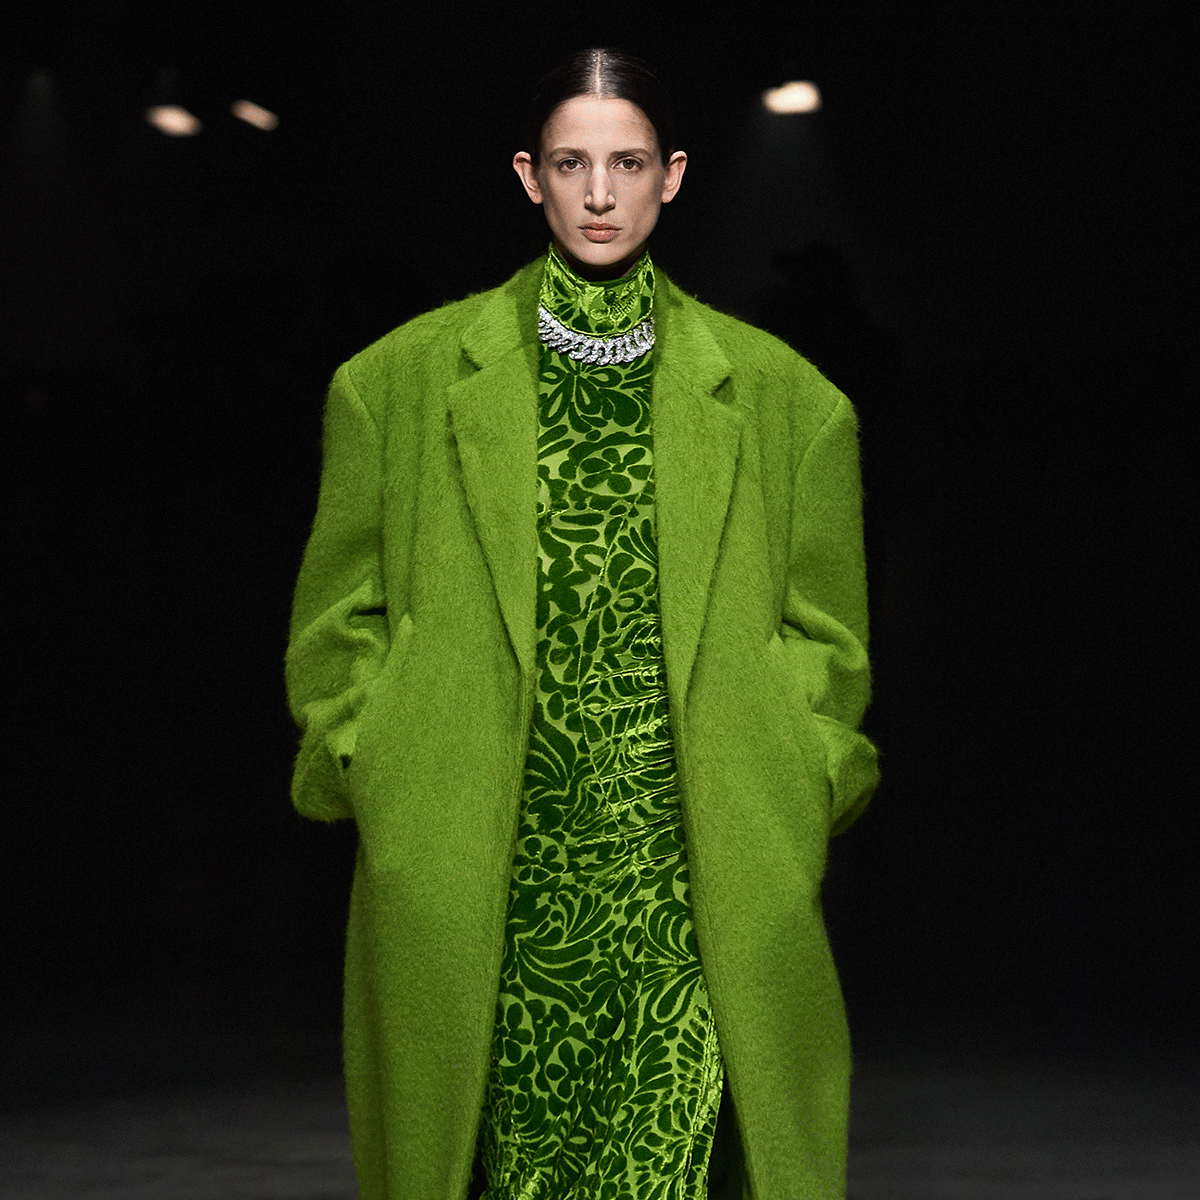 The Milan Fashion Week Trends We'll Be Talking About in 2023